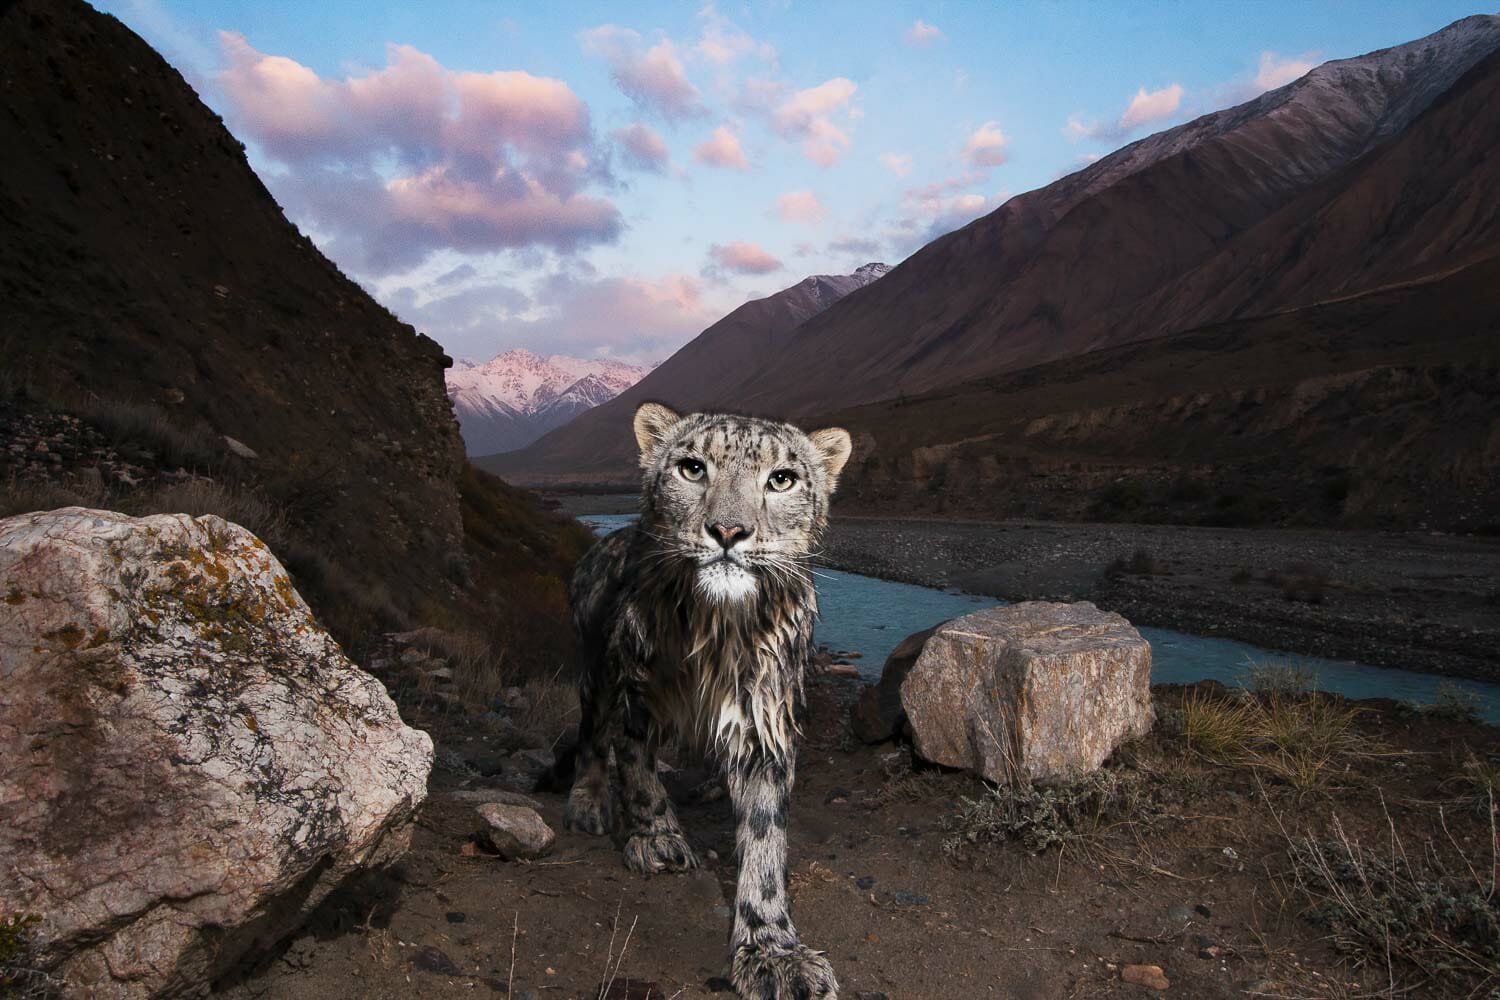 A snow leopard in its natural habitat with a mountainous river valley in the background at dusk.